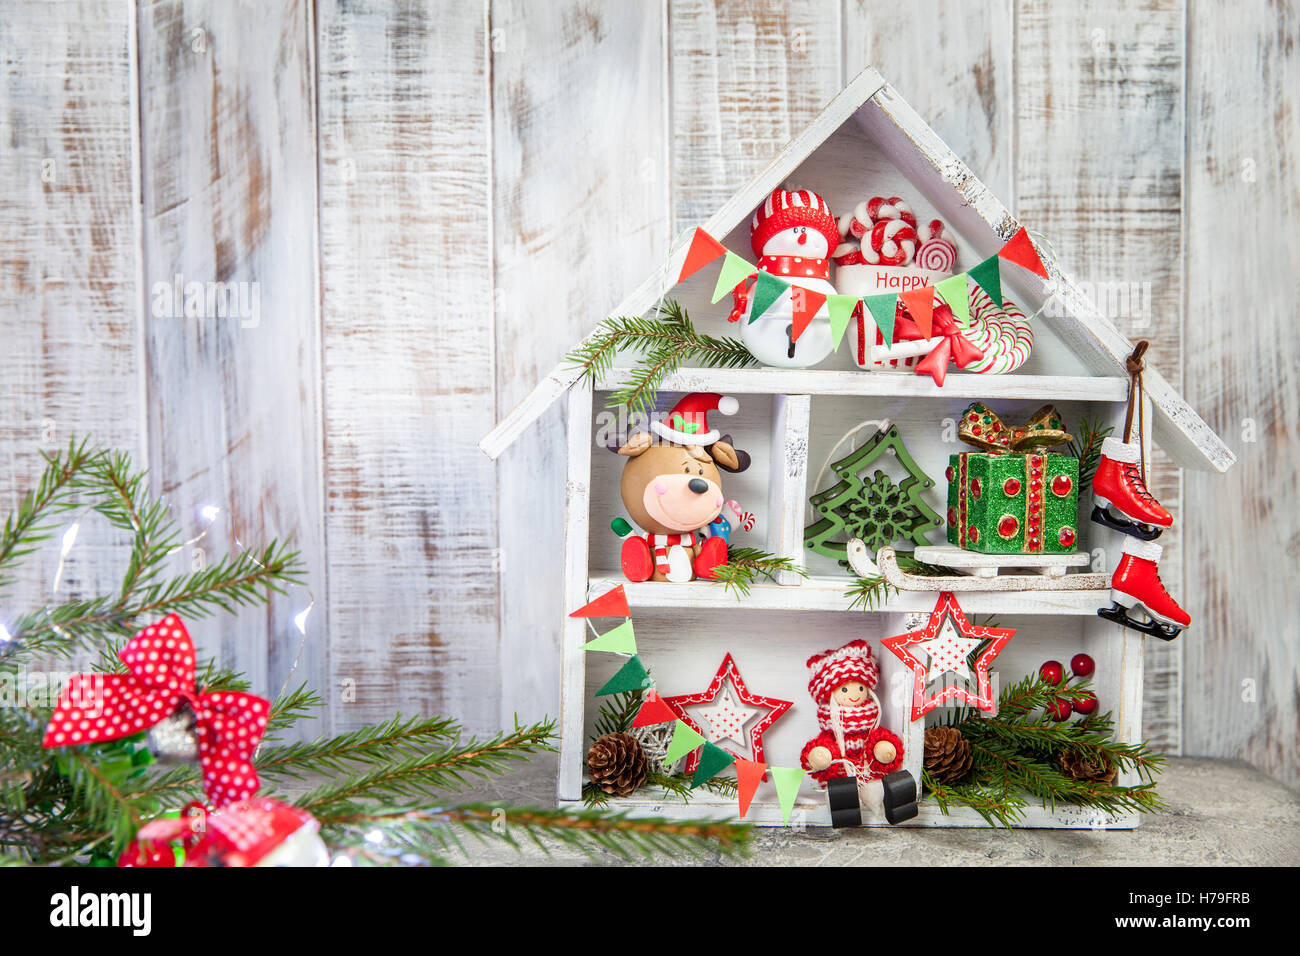 Christmas decoration with wooden box house Stock Photo